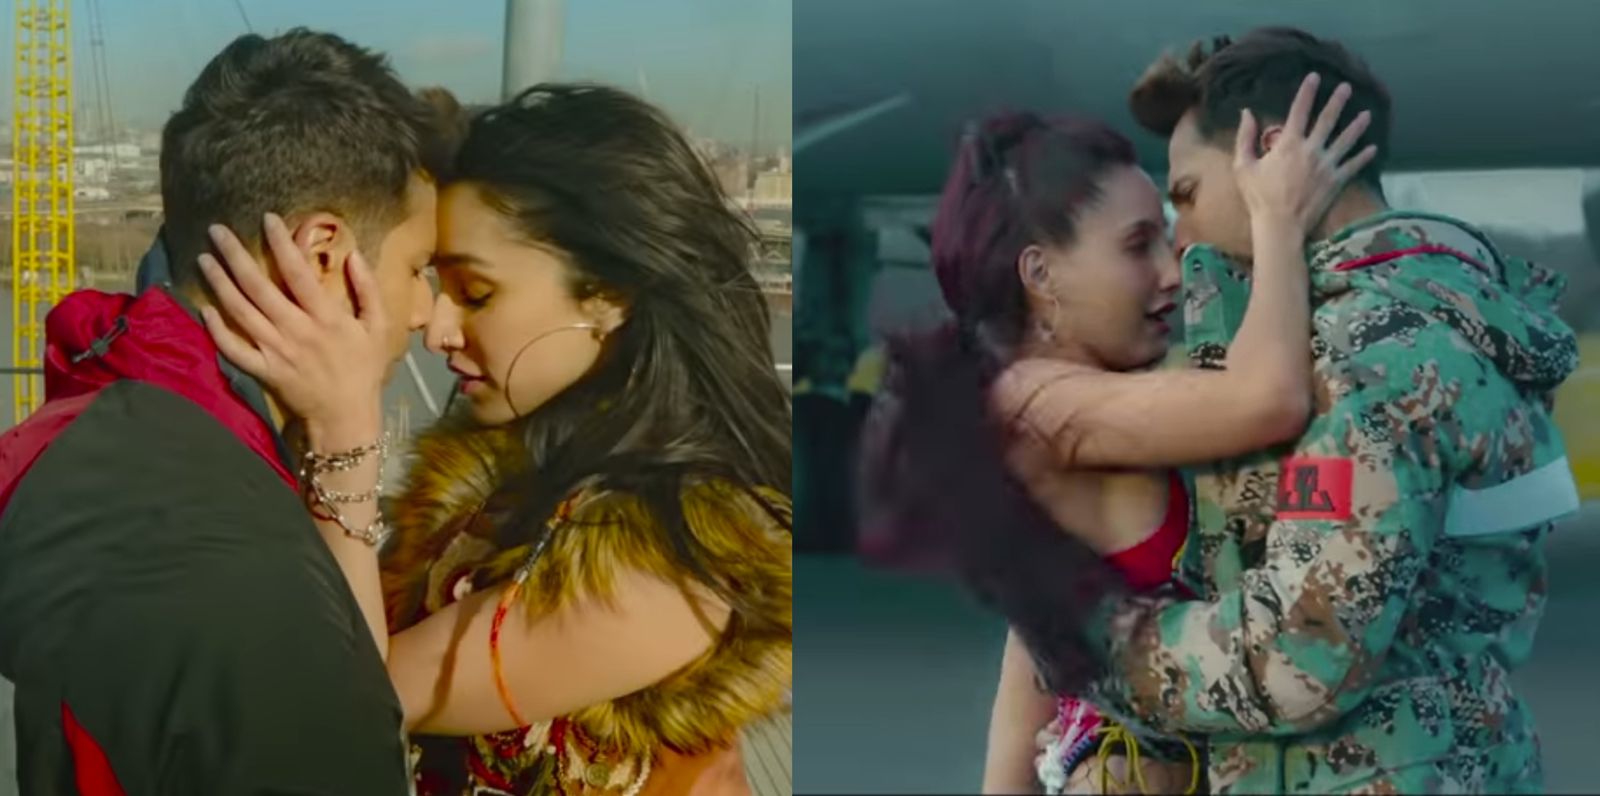 Street Dancer 3D’s Lagti Lahore Di Song: Varun Dhawan Looks Better With Nora Fatehi Than With Shraddha Kapoor In This Remix!